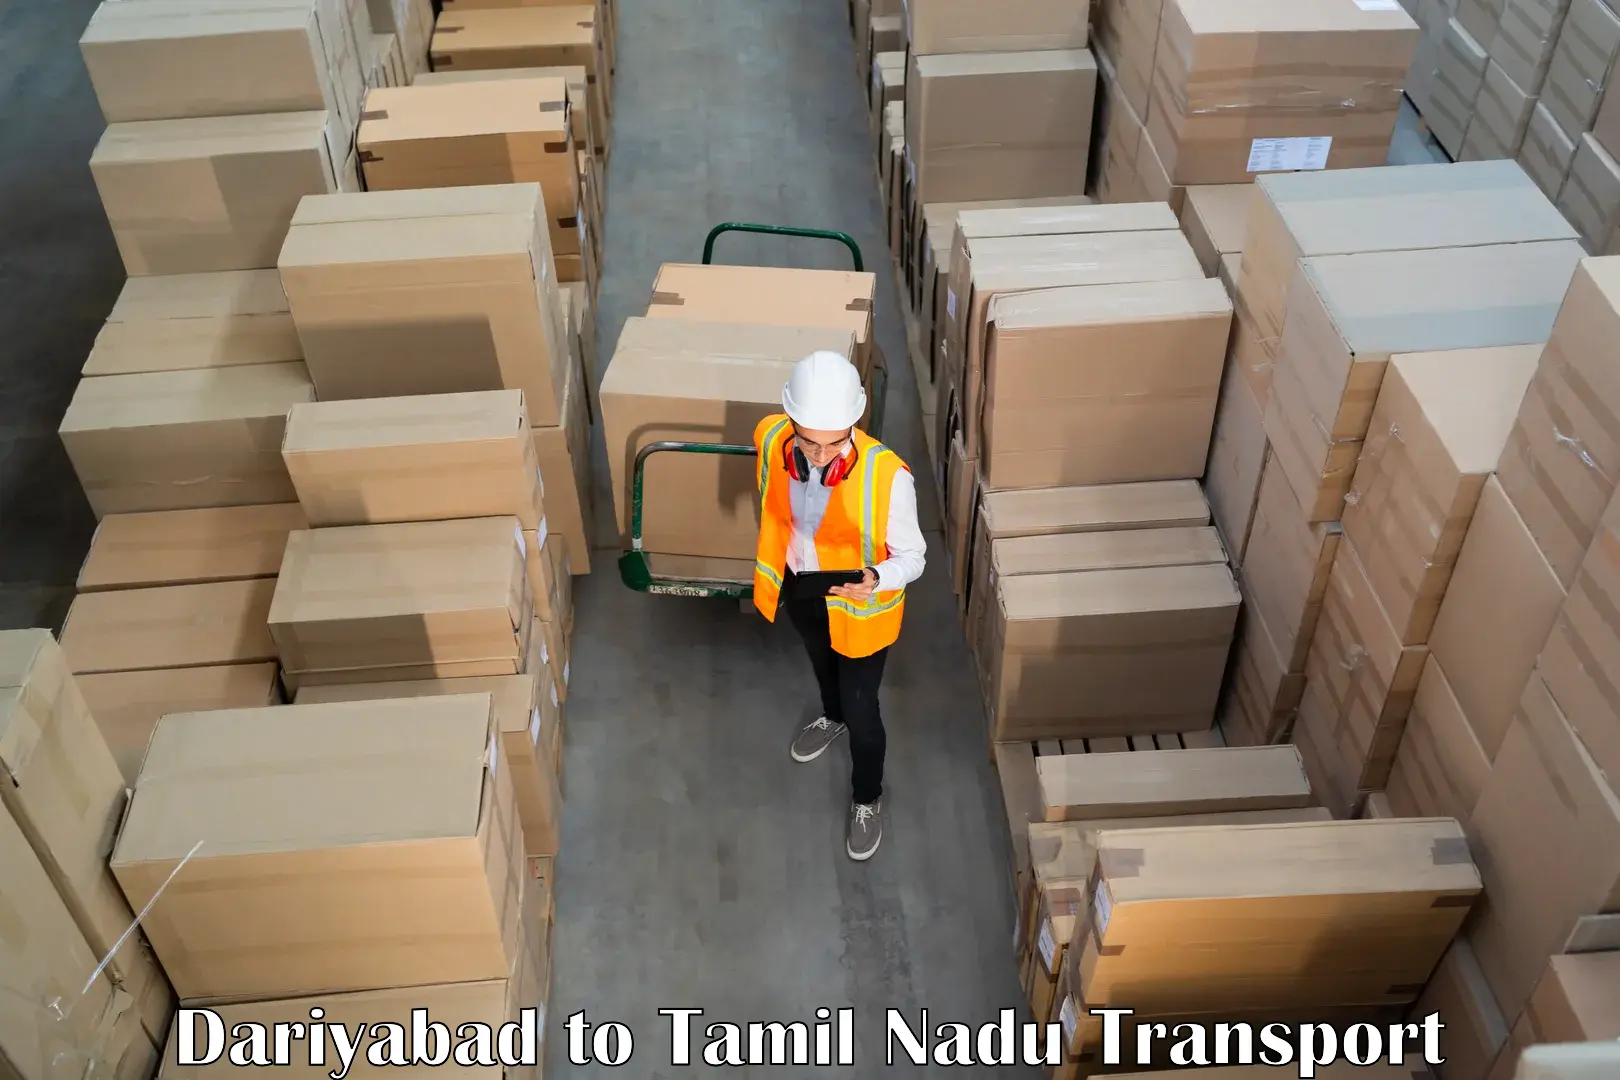 Package delivery services Dariyabad to Melmaruvathur